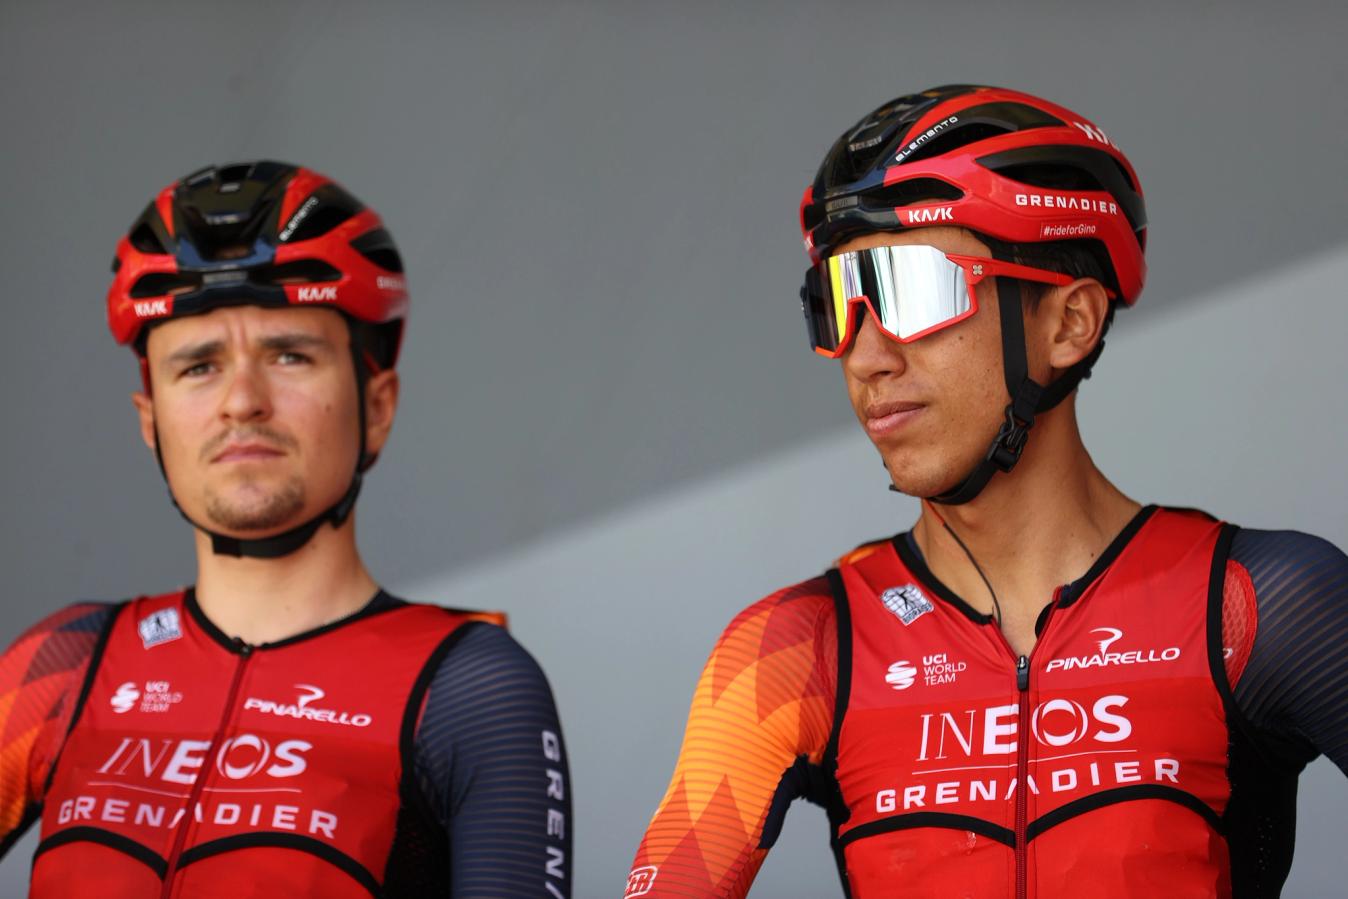 With the old guard of Ineos growing older, it is down to the likes of Tom Pidcock and Bernal to rebuild the team to brilliance